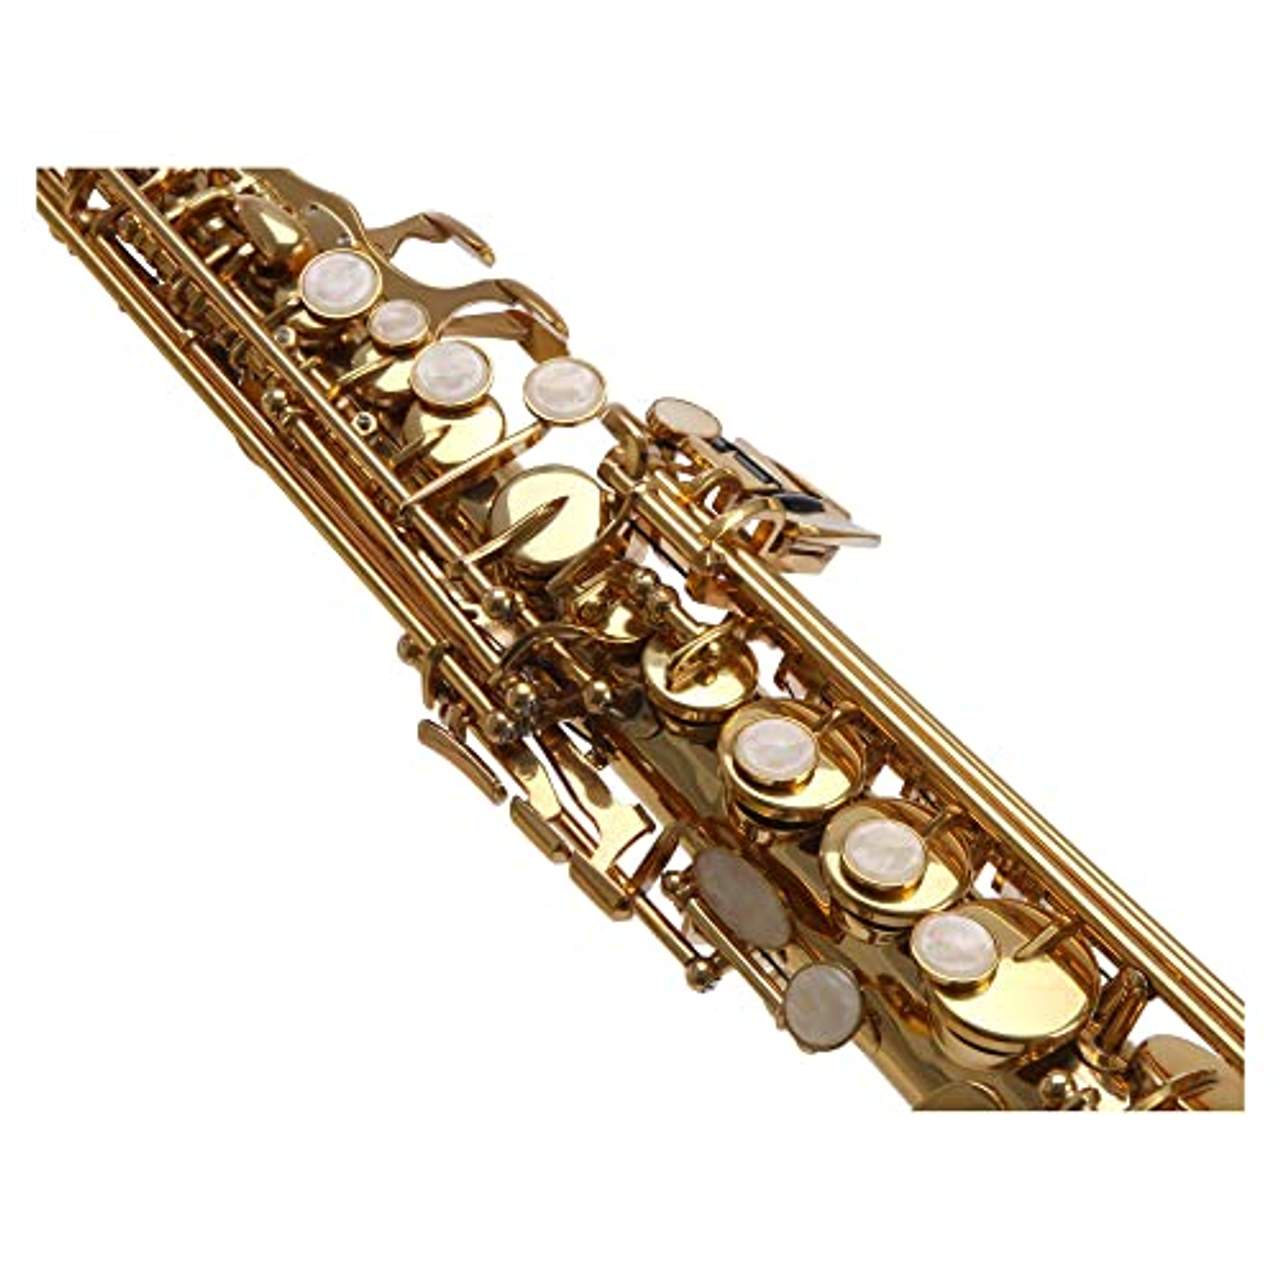 Classic Cantabile Winds SS-450 Sopransaxophon